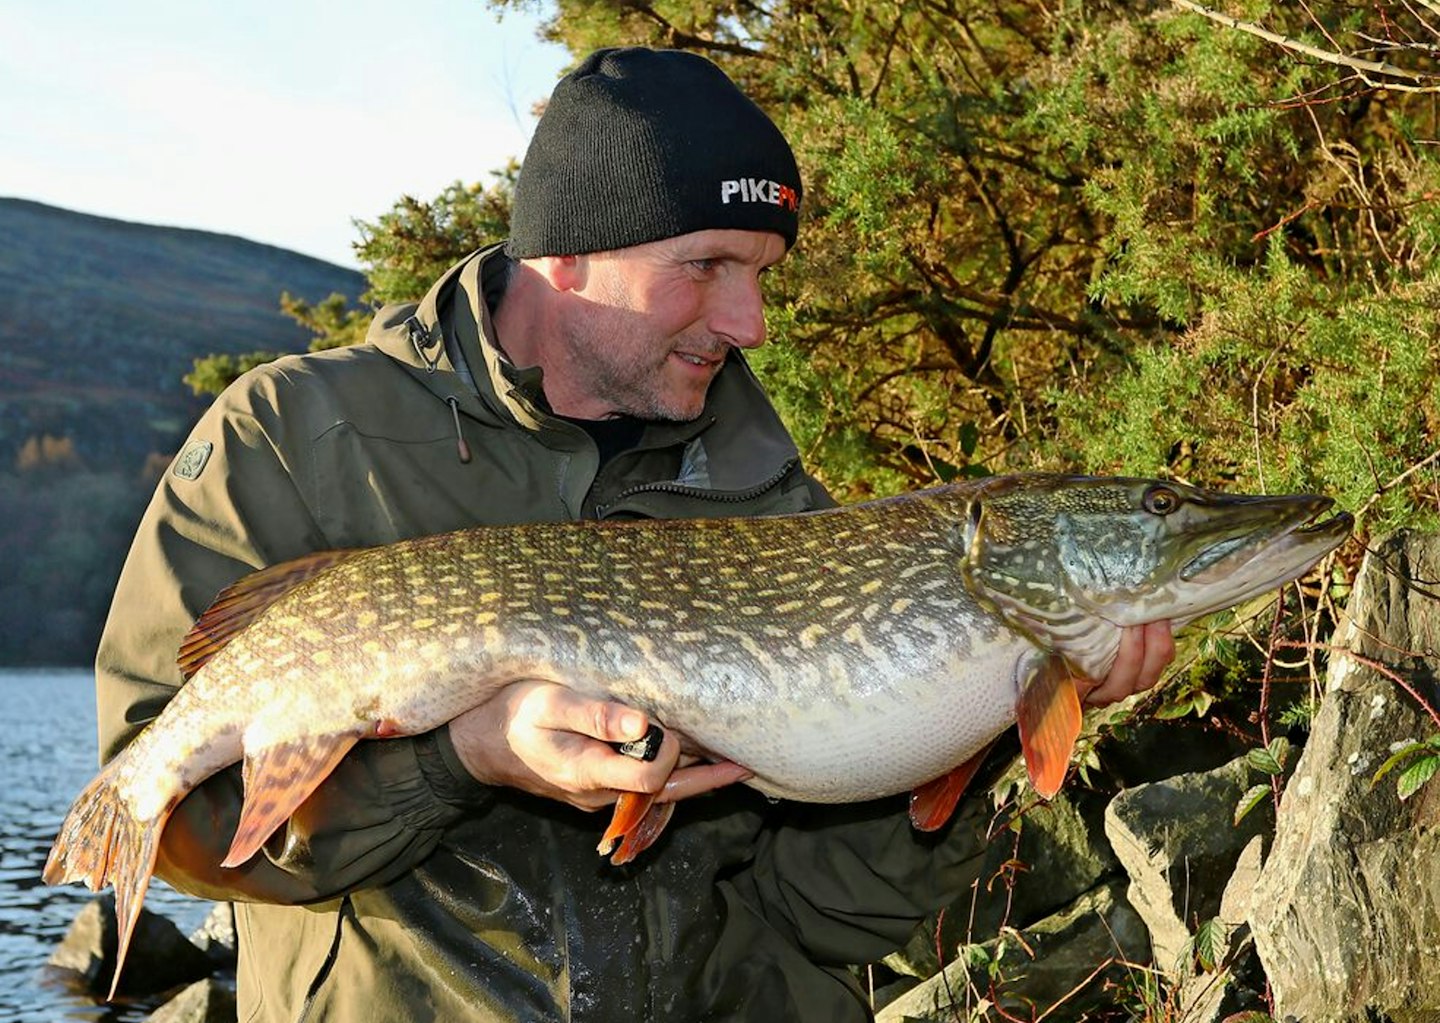 The right way to hold a pike – note the hand positions